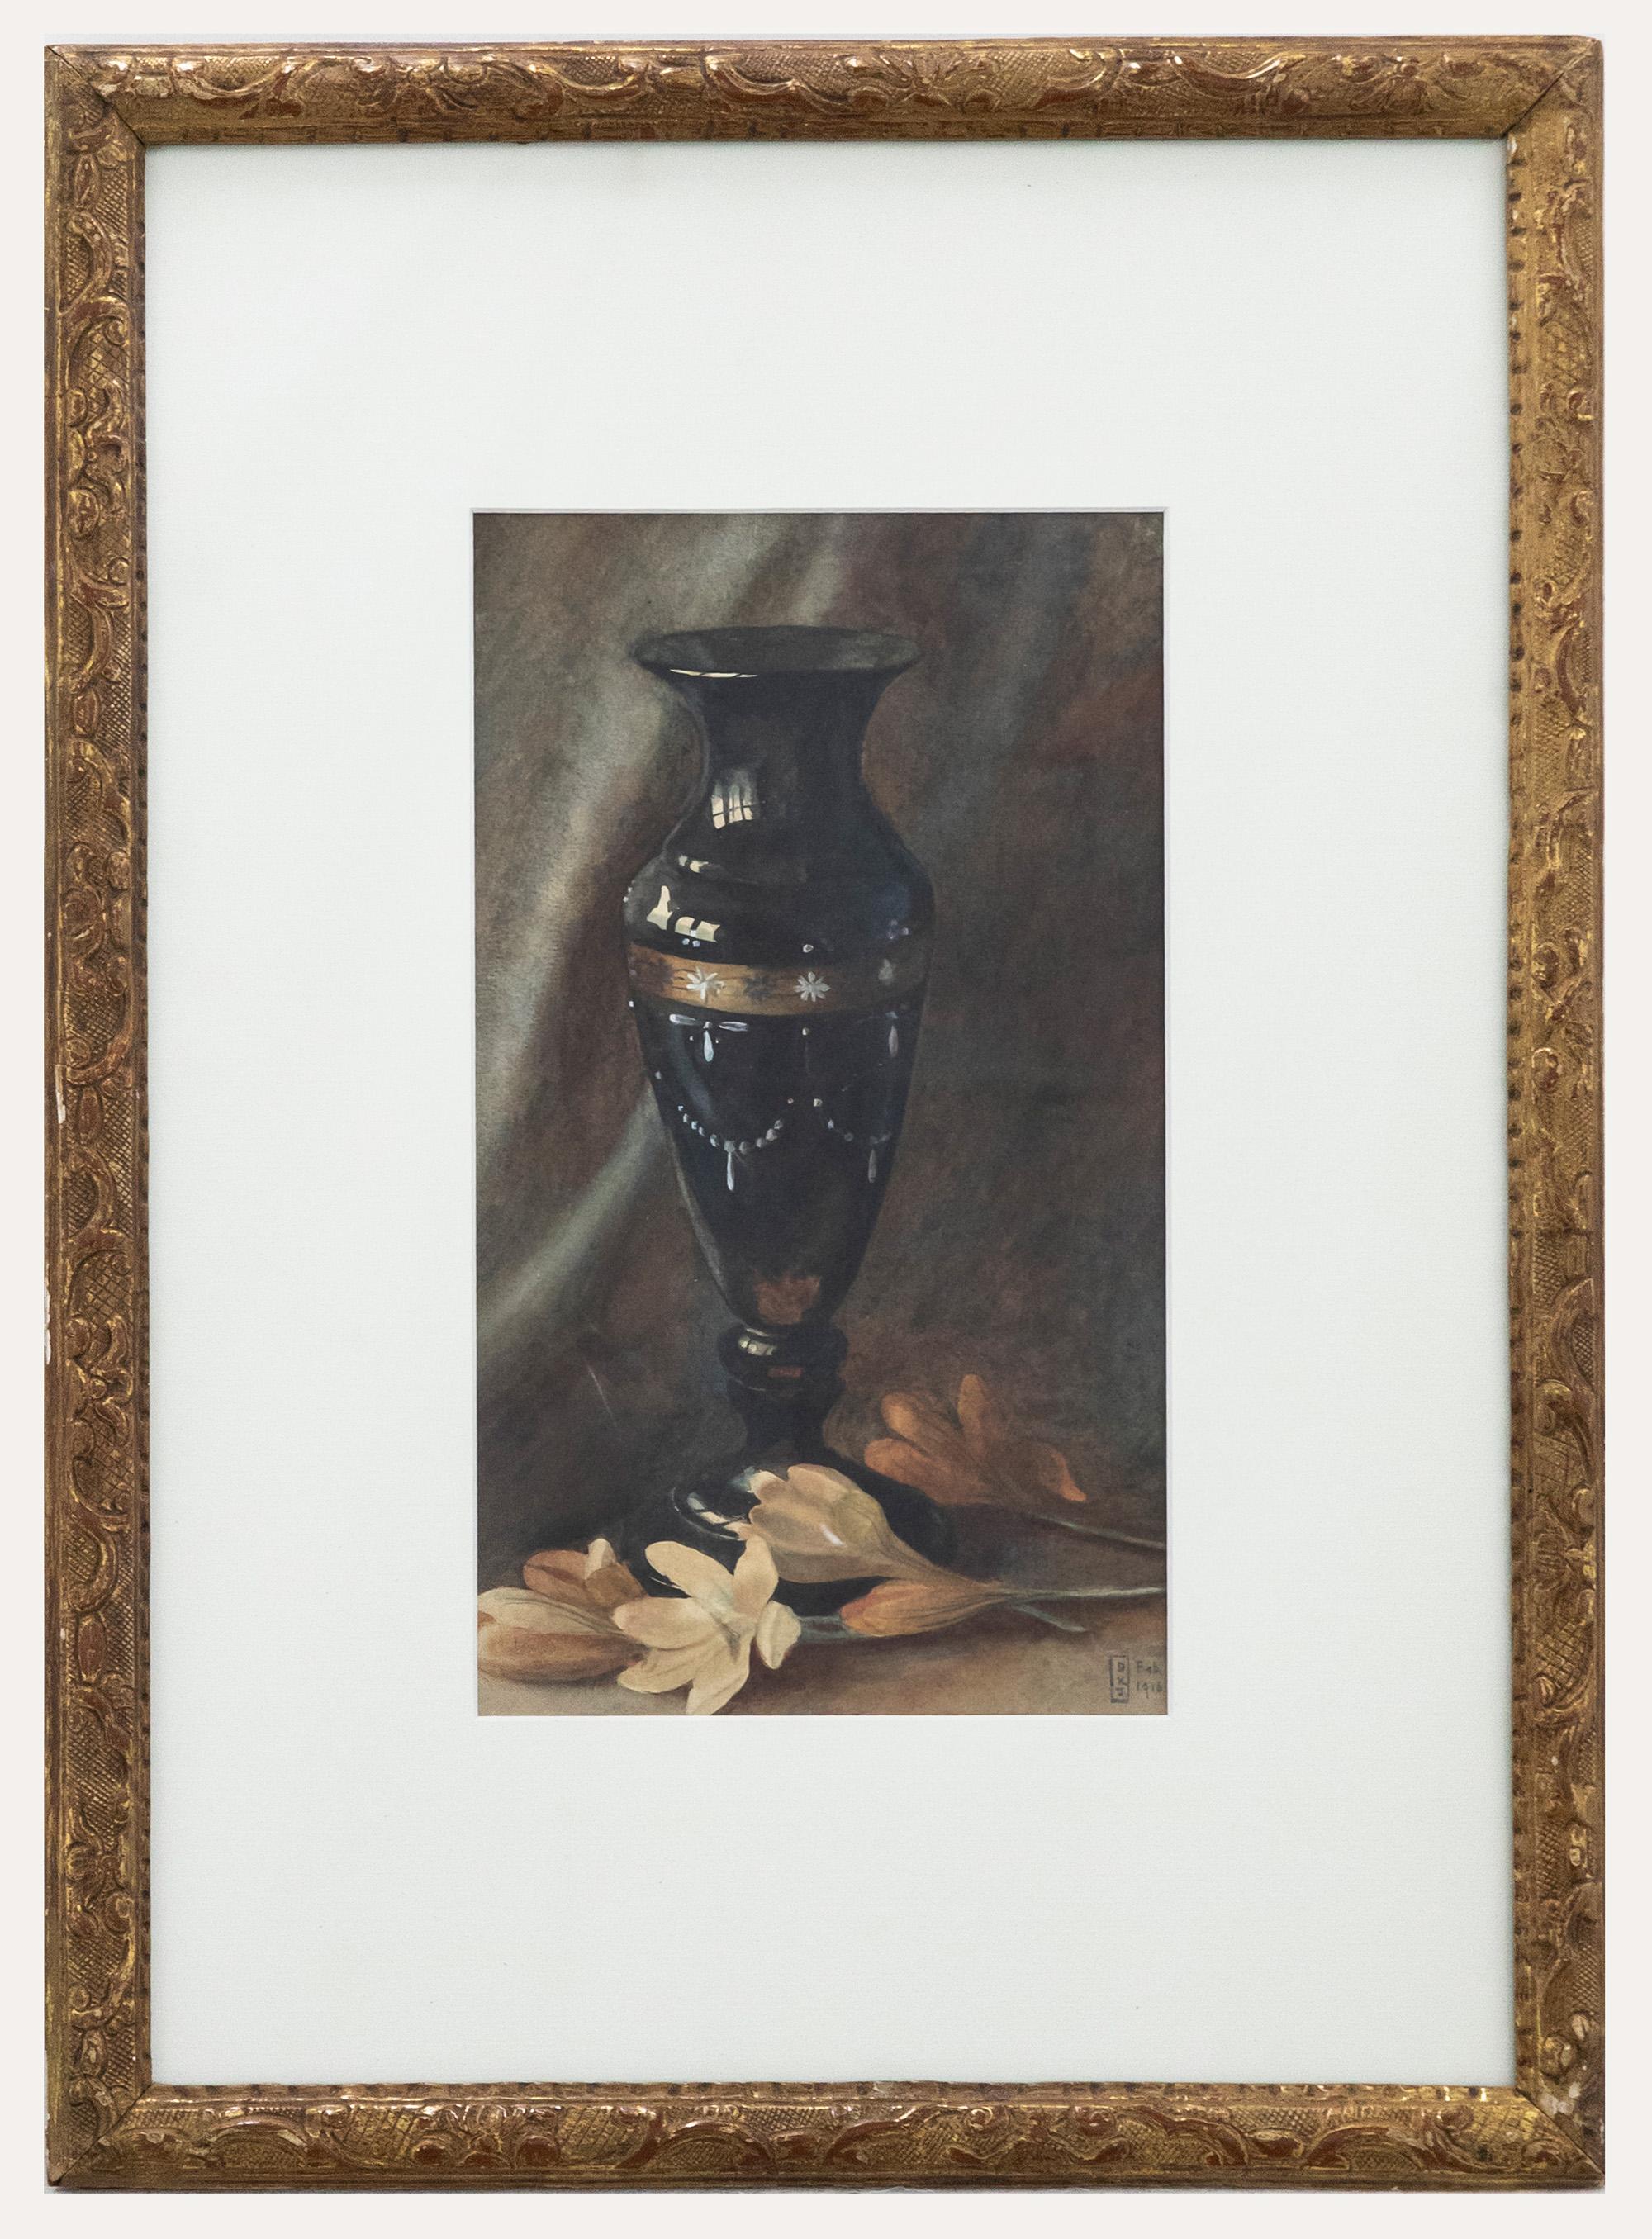 Unknown Still-Life - D.K.J - Framed Early 20th Century Watercolour, Lustre Vase with Crocus Flowers